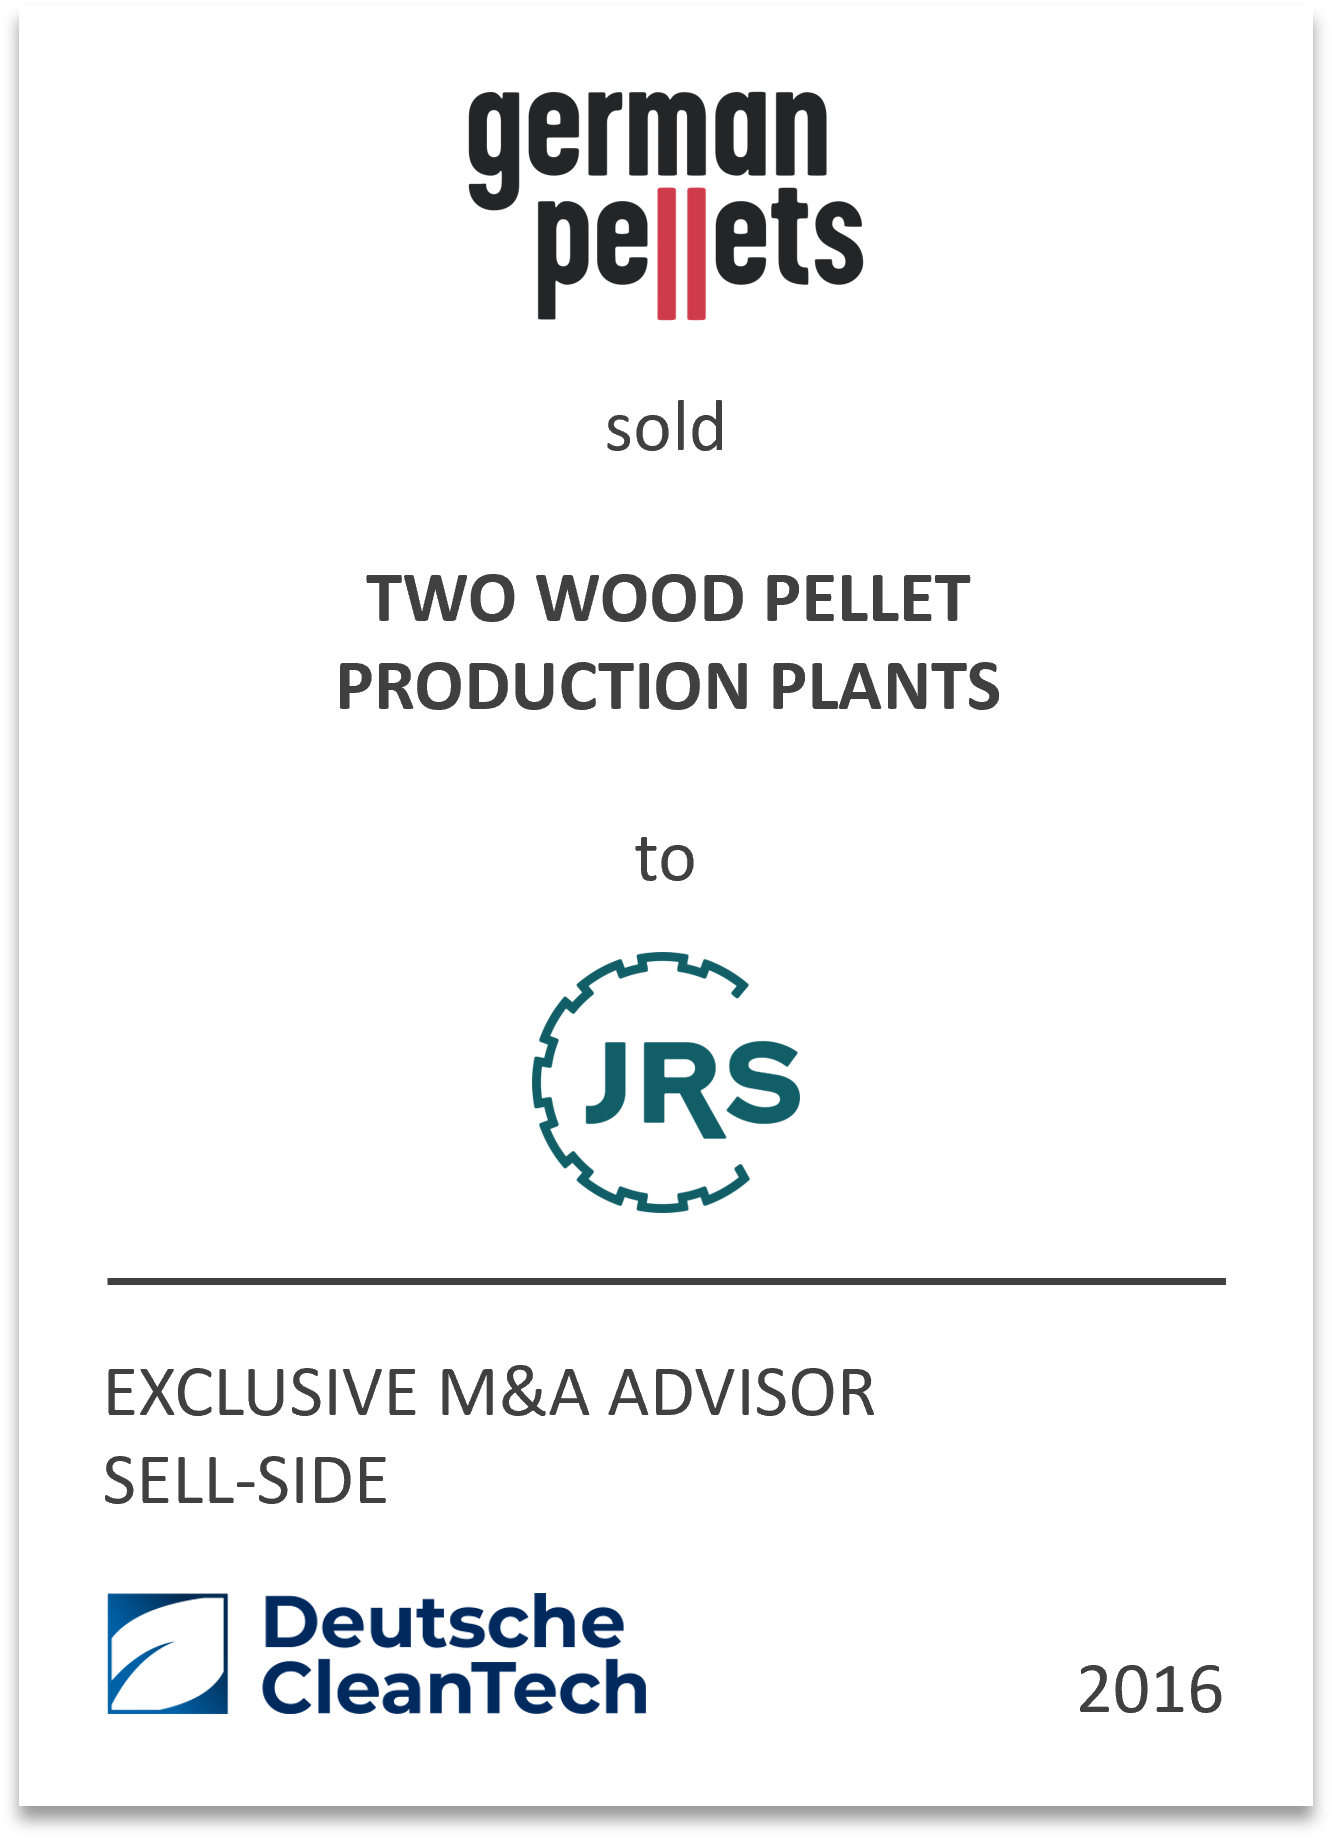 J. Rettenmaier & Söhne GmbH + Co KG has acquired two wood pellet production plants owned and operated by German Pellets GmbH